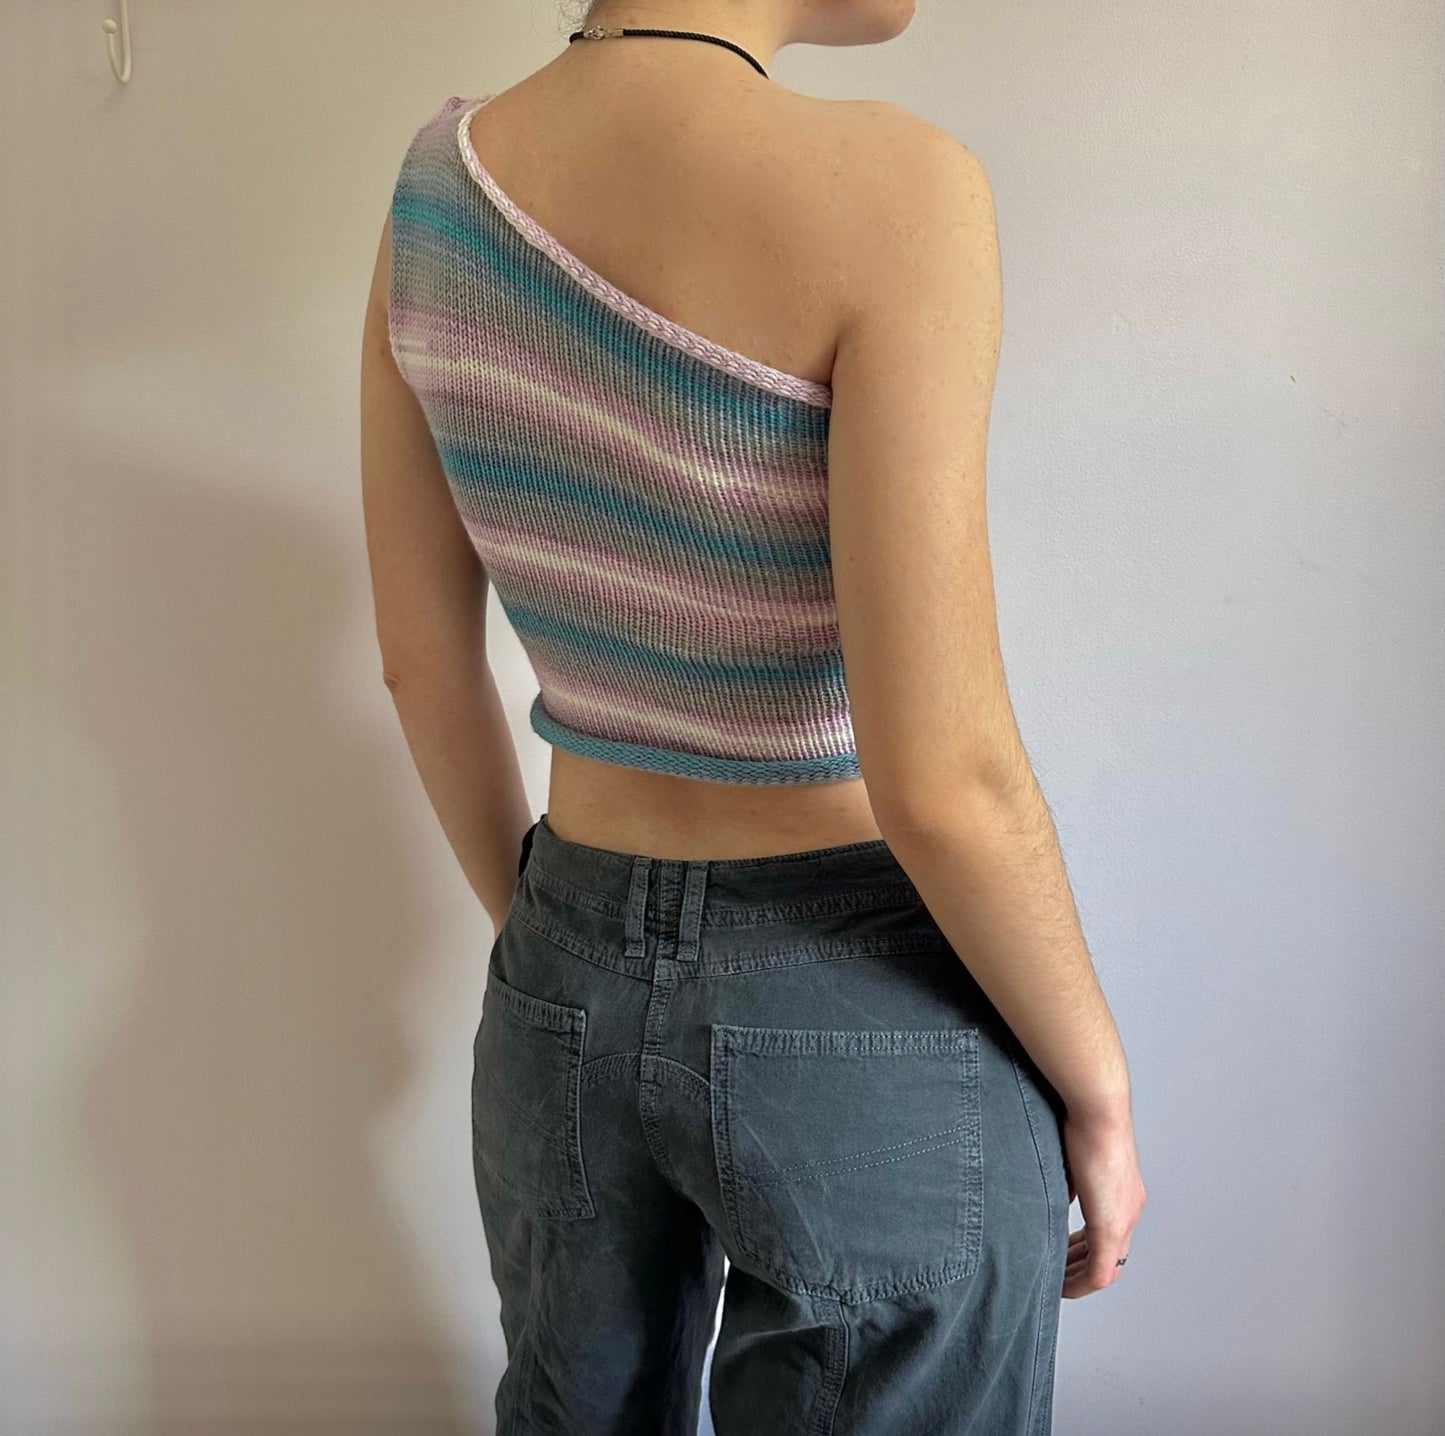 Handmade knitted one shoulder asymmetrical top in blue, lilac and white